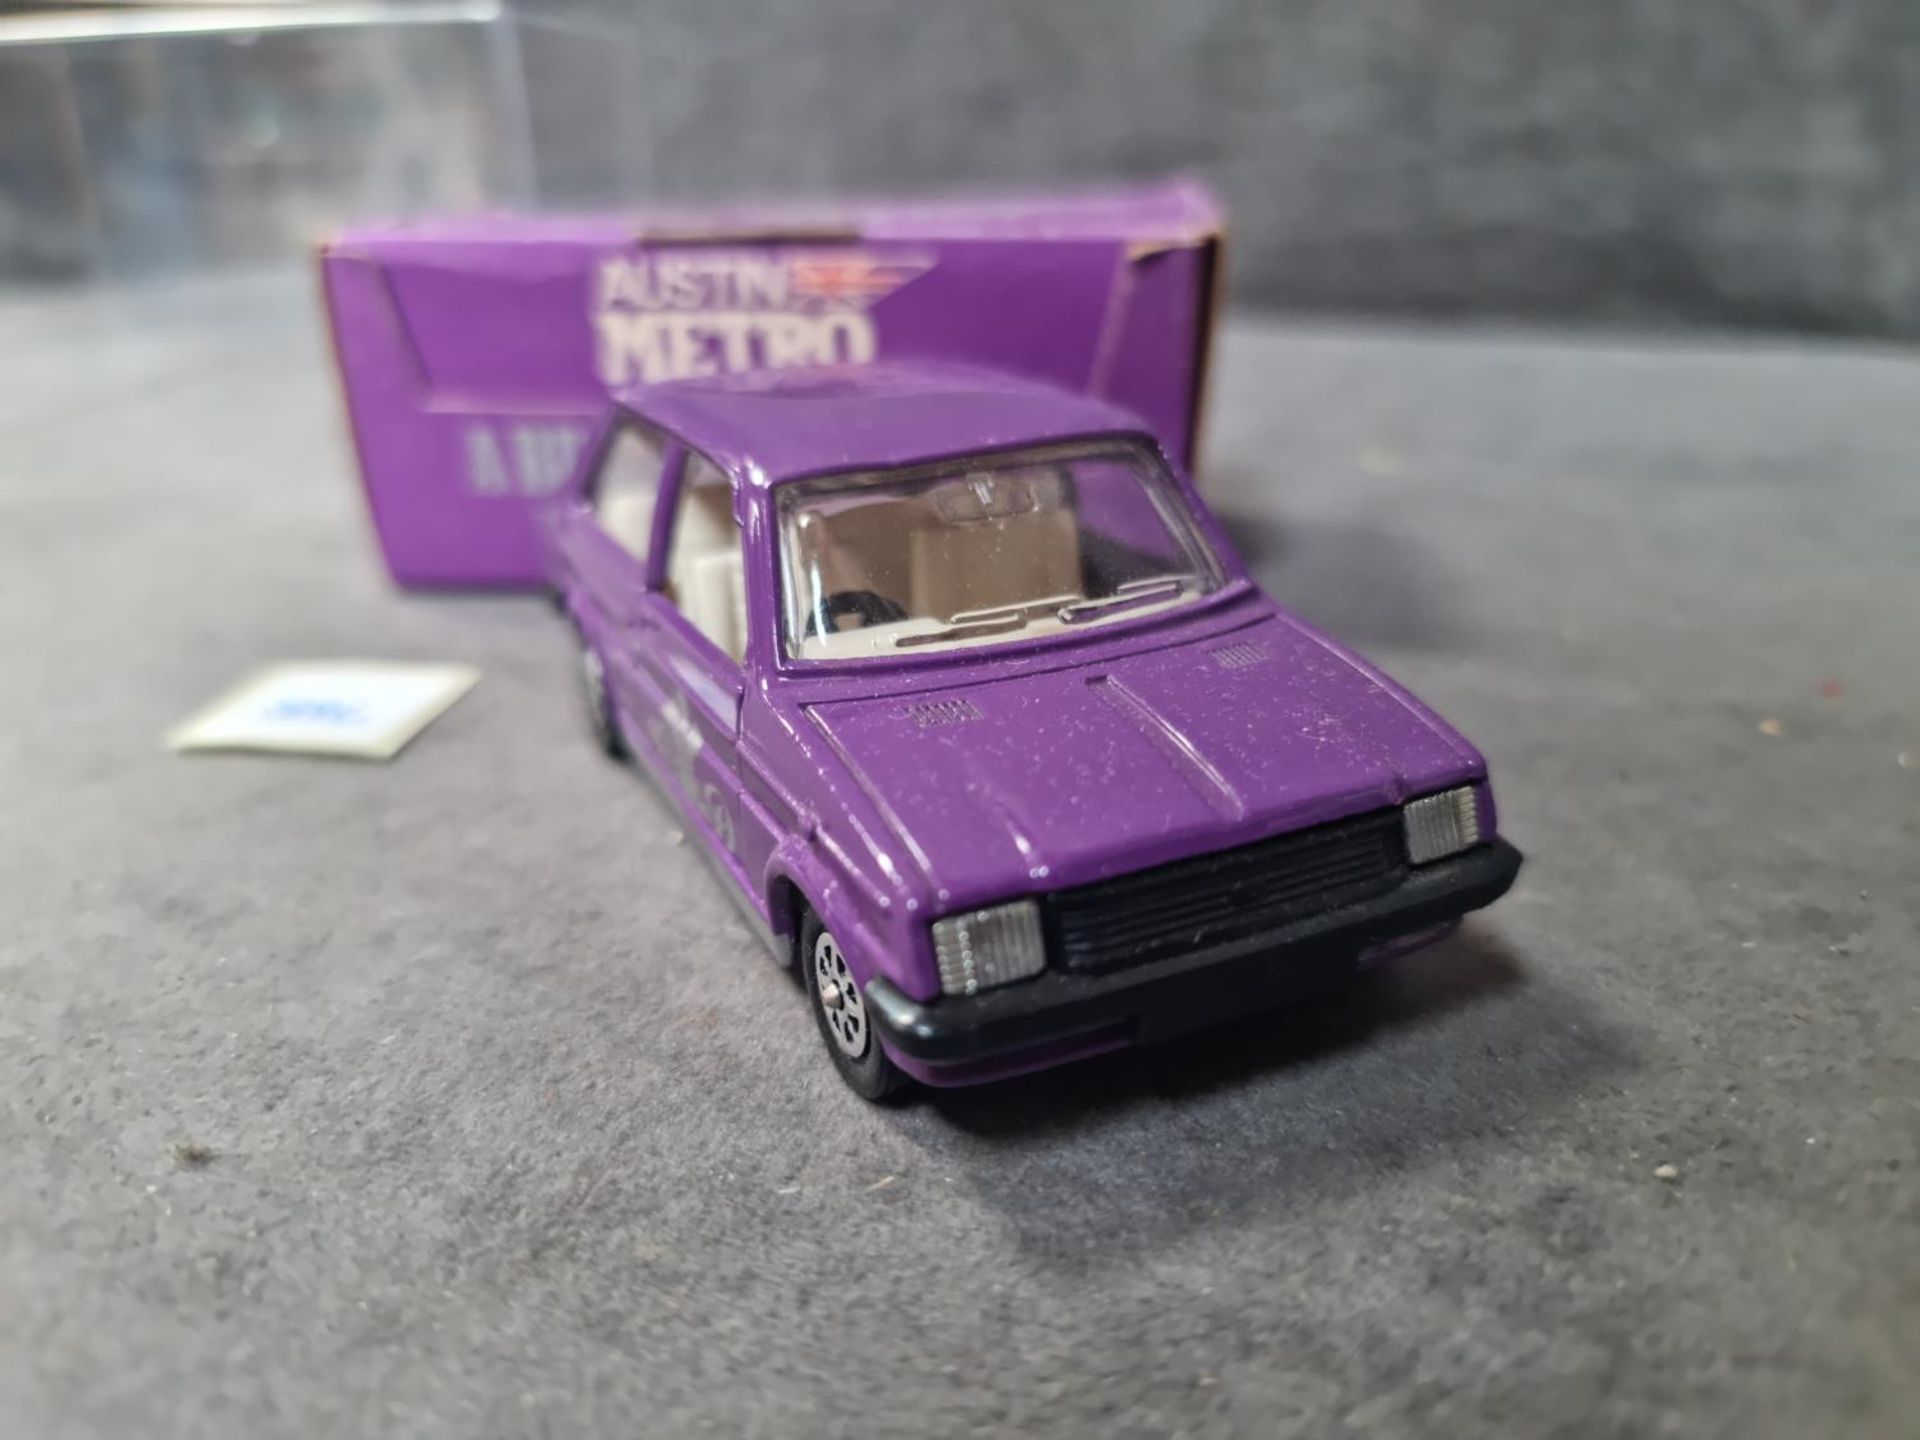 Corgi Special Edition Mini Metro A British Car For A Royal Occasion 1981 Limited Edition Box Special - Image 4 of 4